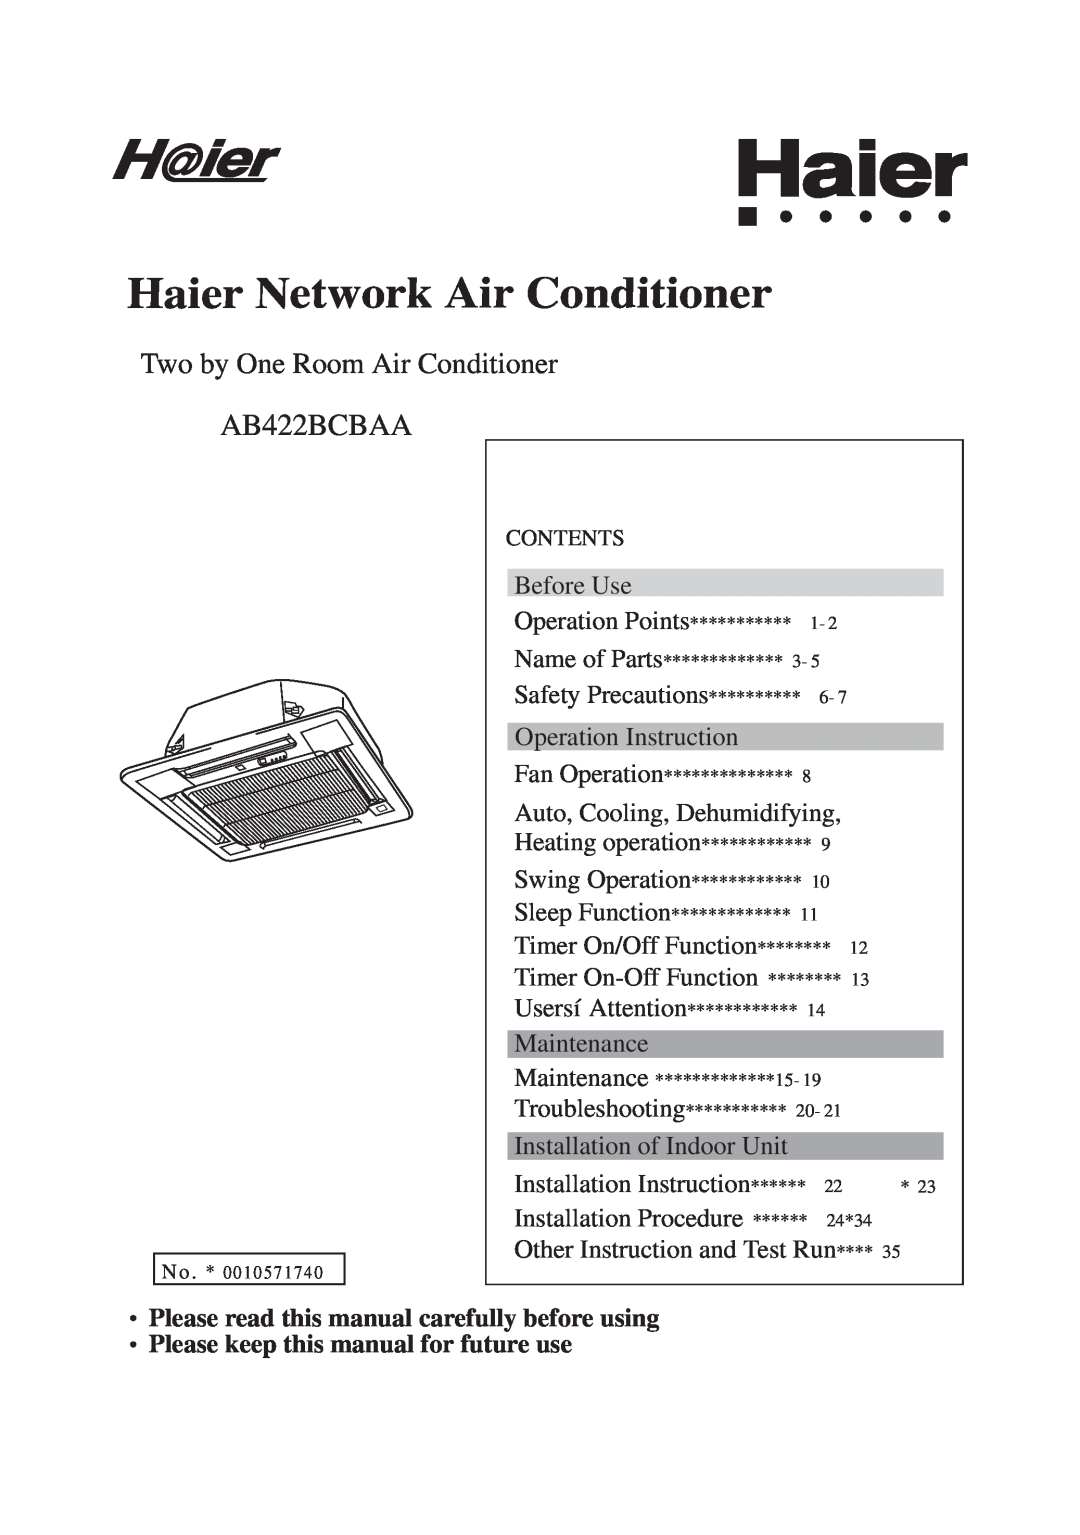 Haier AB422BCBAA manual Haier Network Air Conditioner, Two by One Room Air Conditioner 